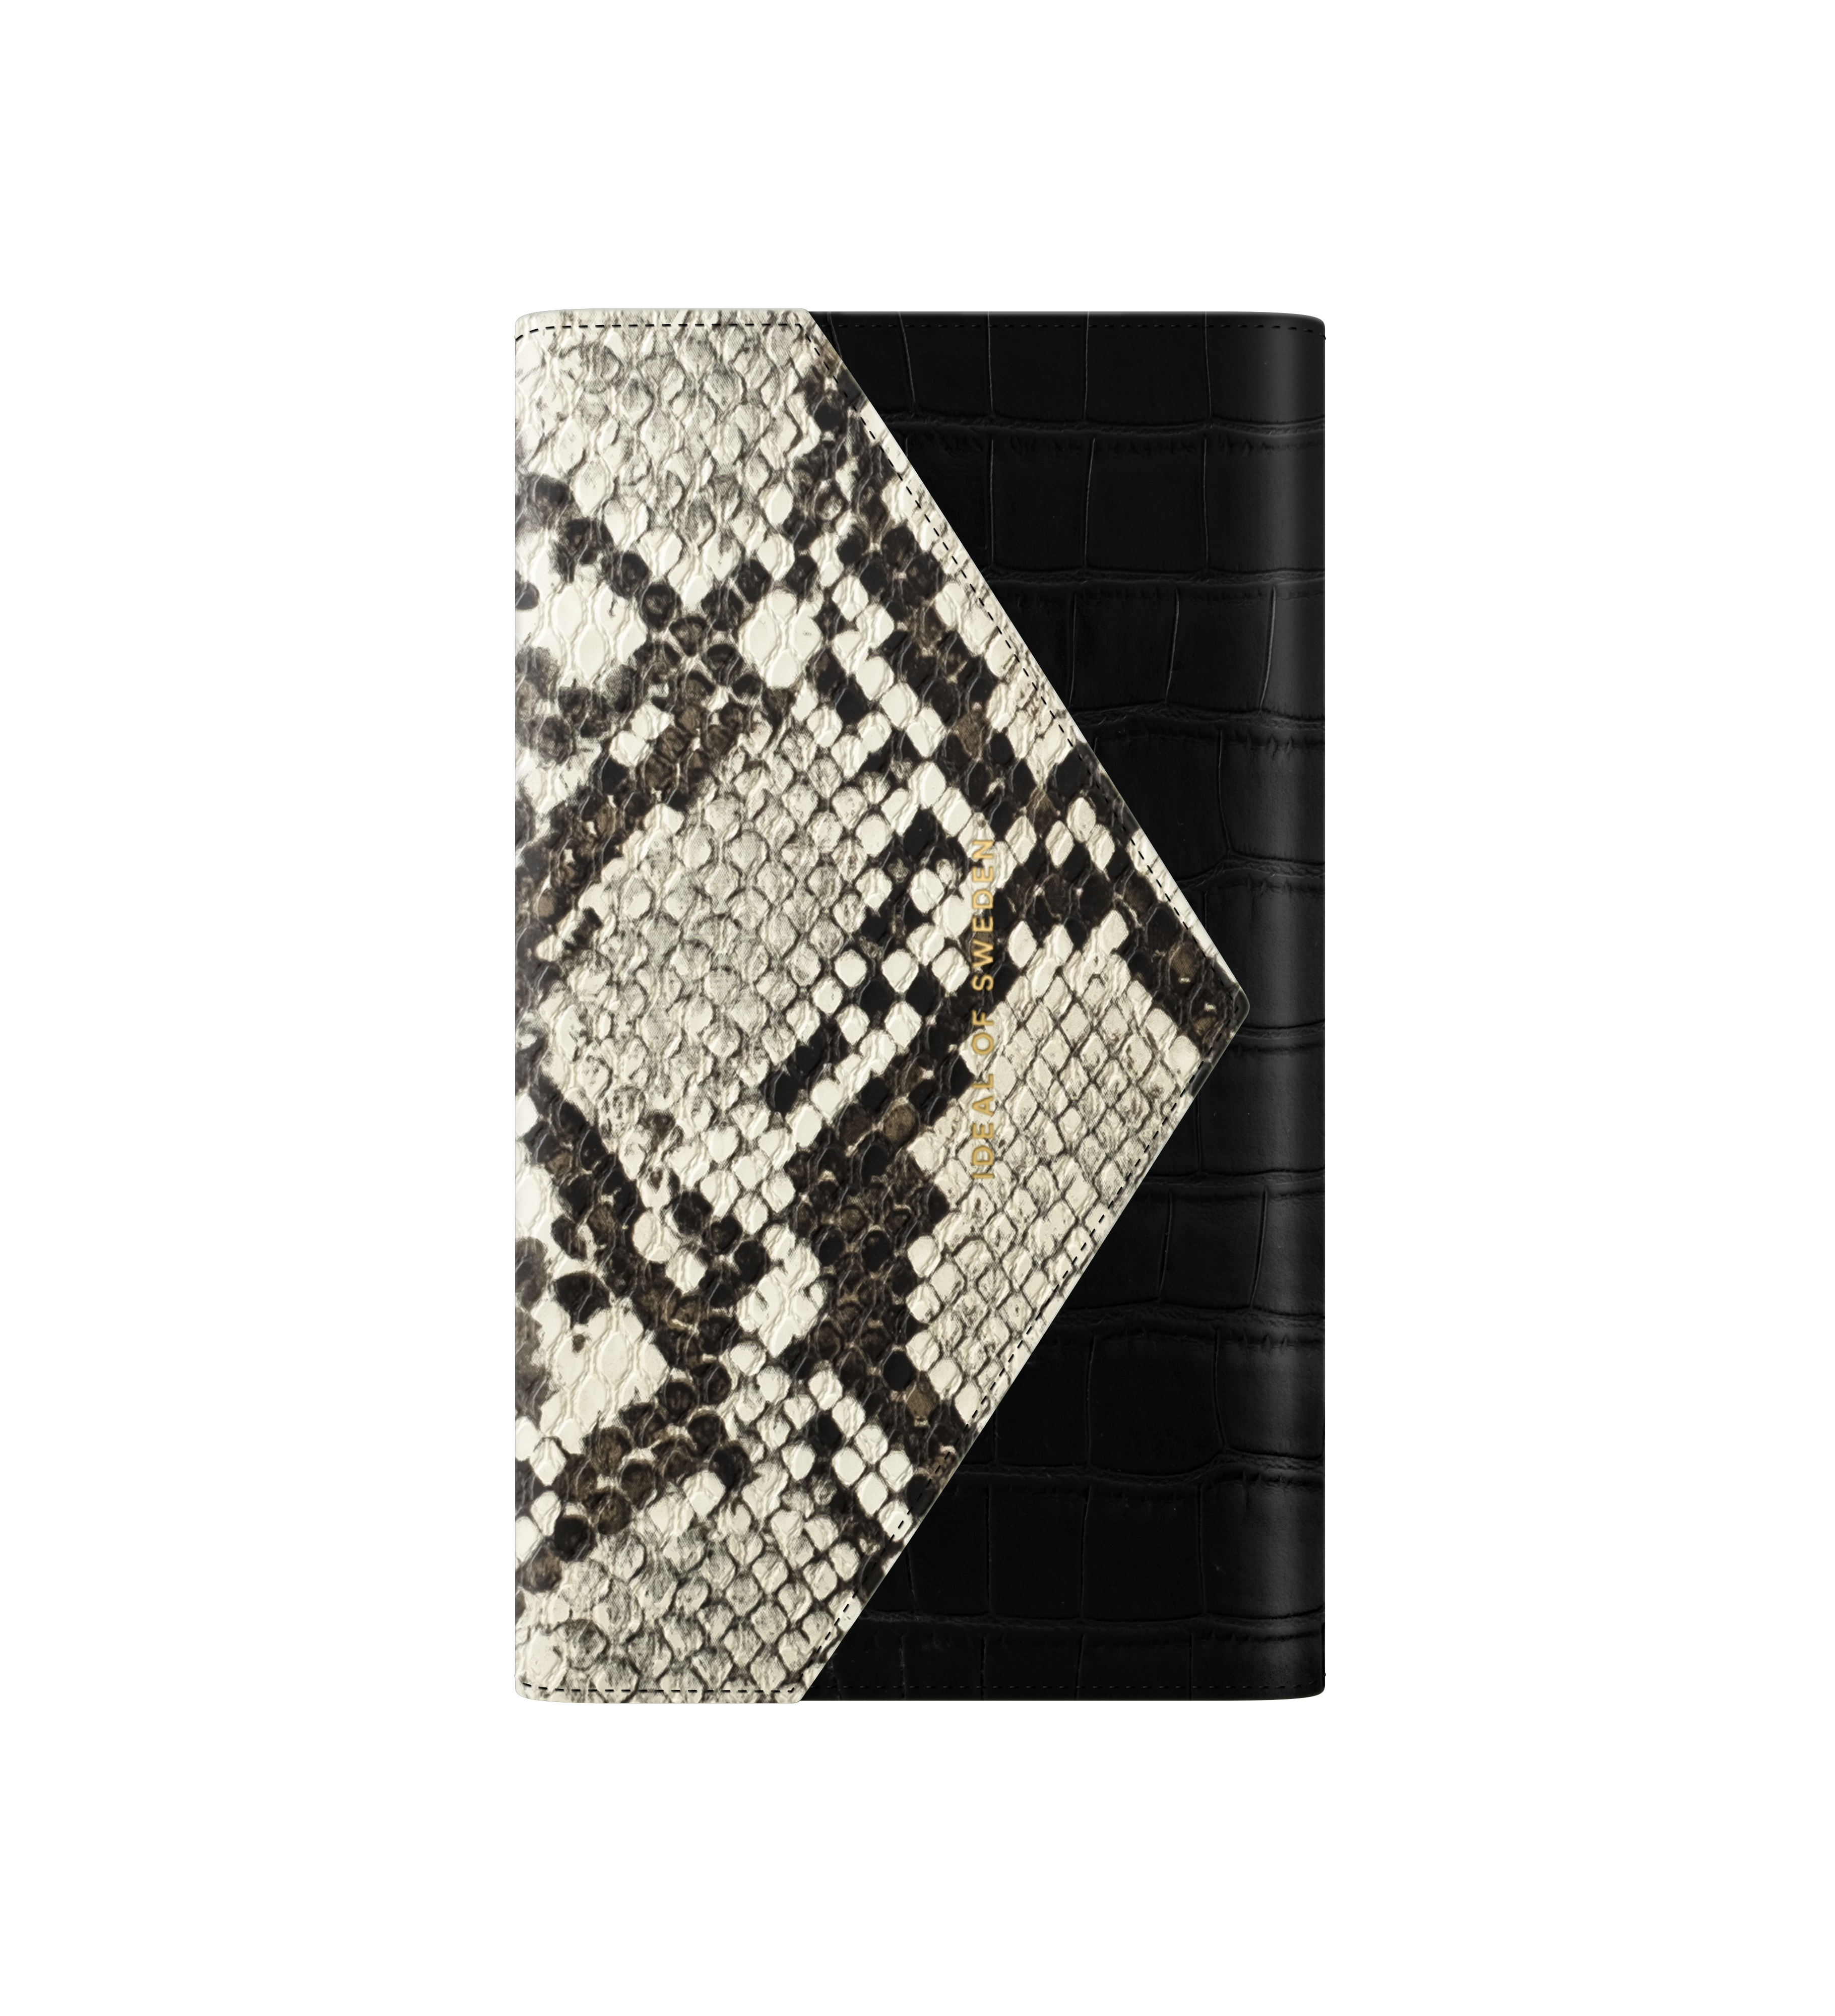 Full Mini, Python 12 IPhone IDEAL SWEDEN Cover, Apple, IDECSS20-I2054-199, Midnight OF